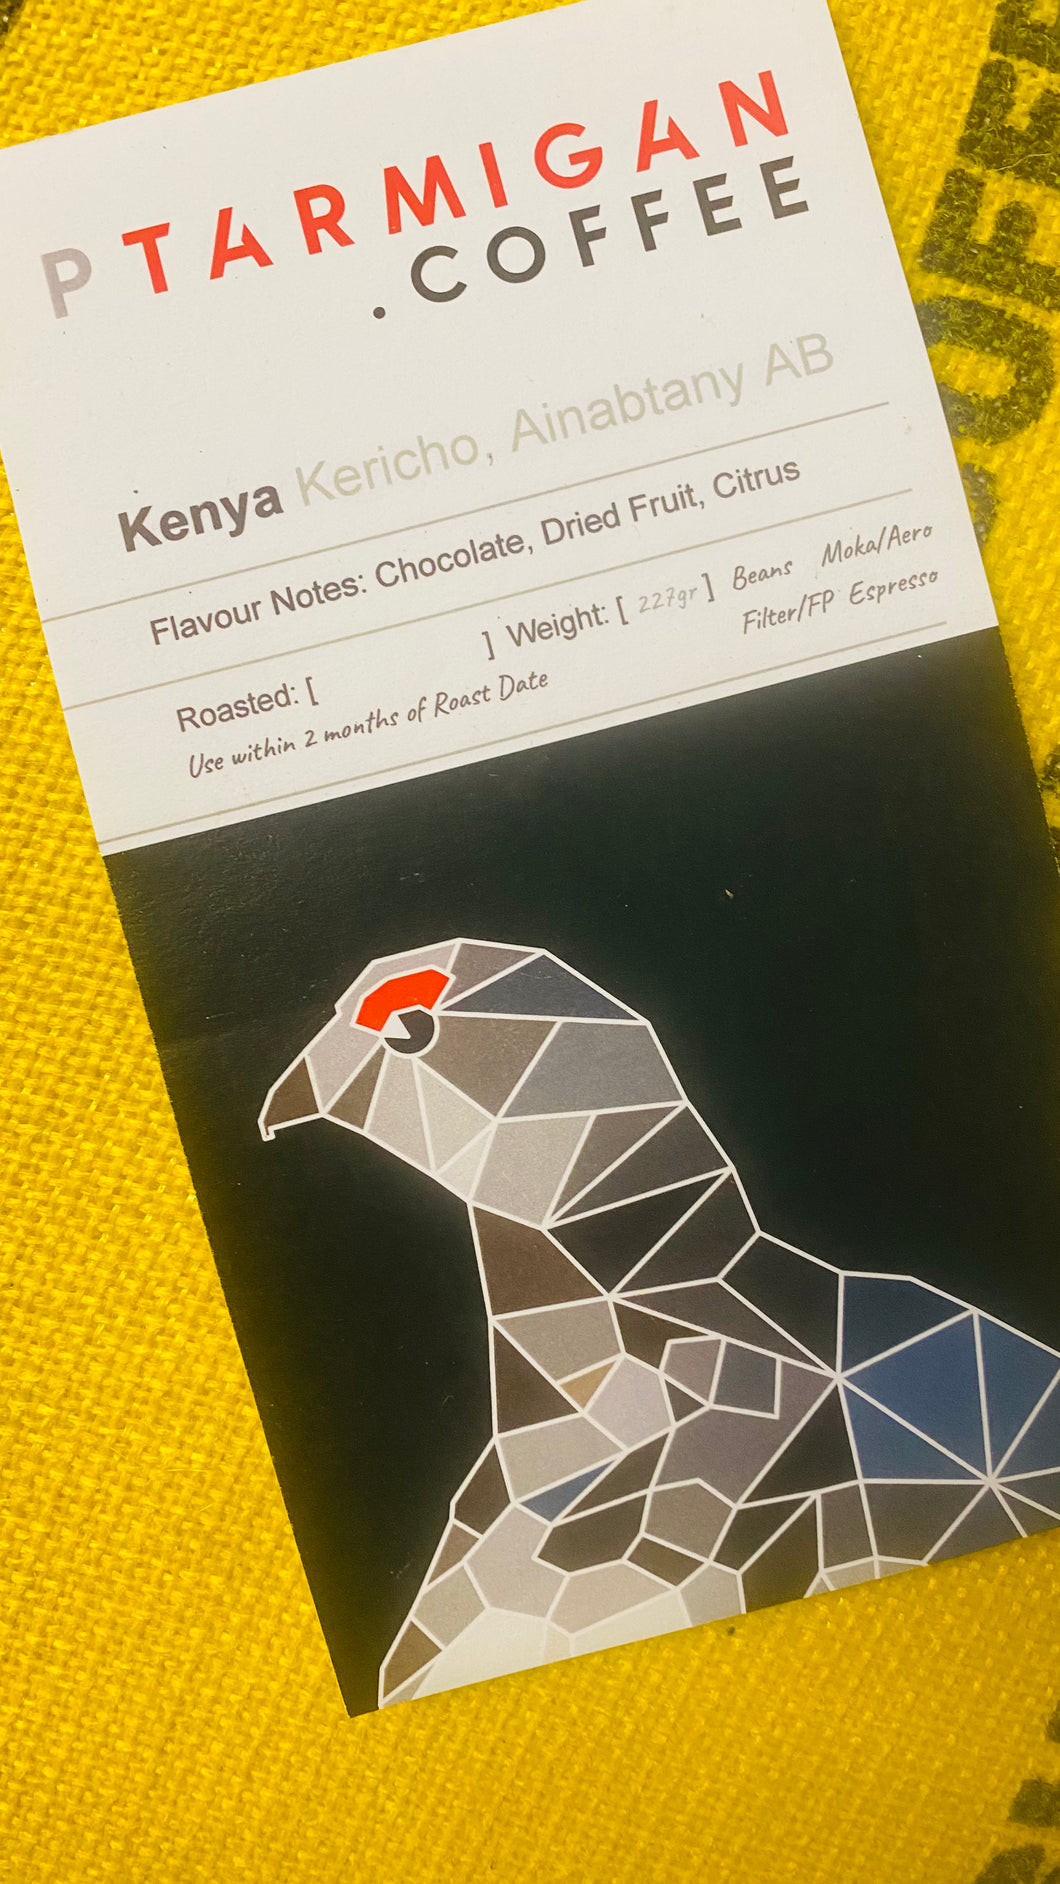 ** Sold Out ** Kenya Kericho Ainabtany AB - Limited Edition